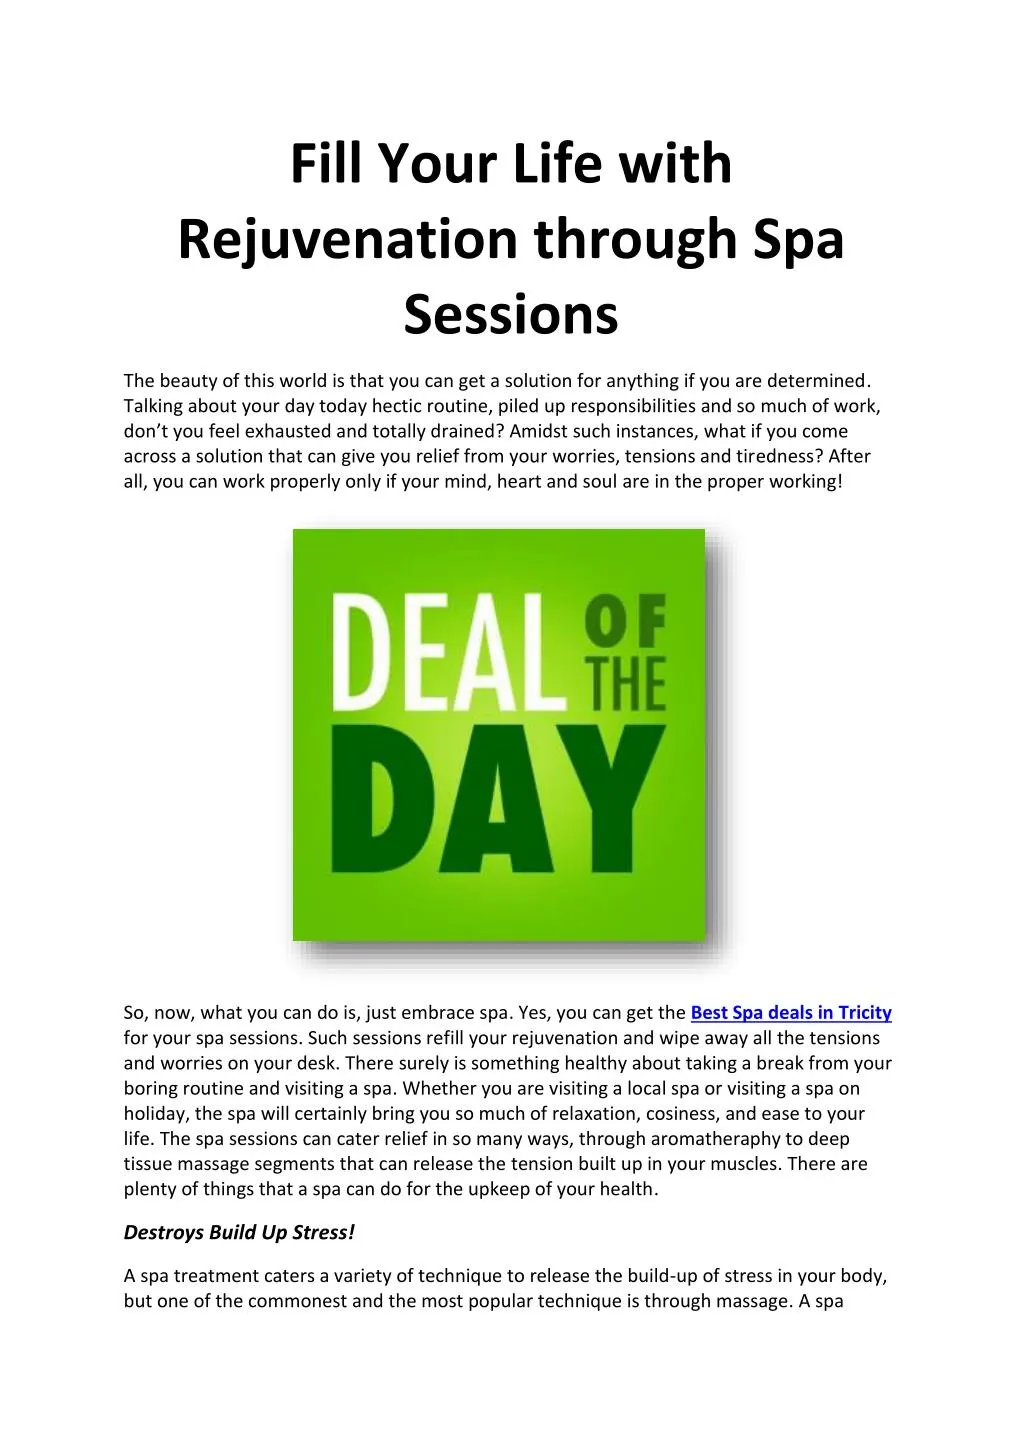 fill your life with rejuvenation through